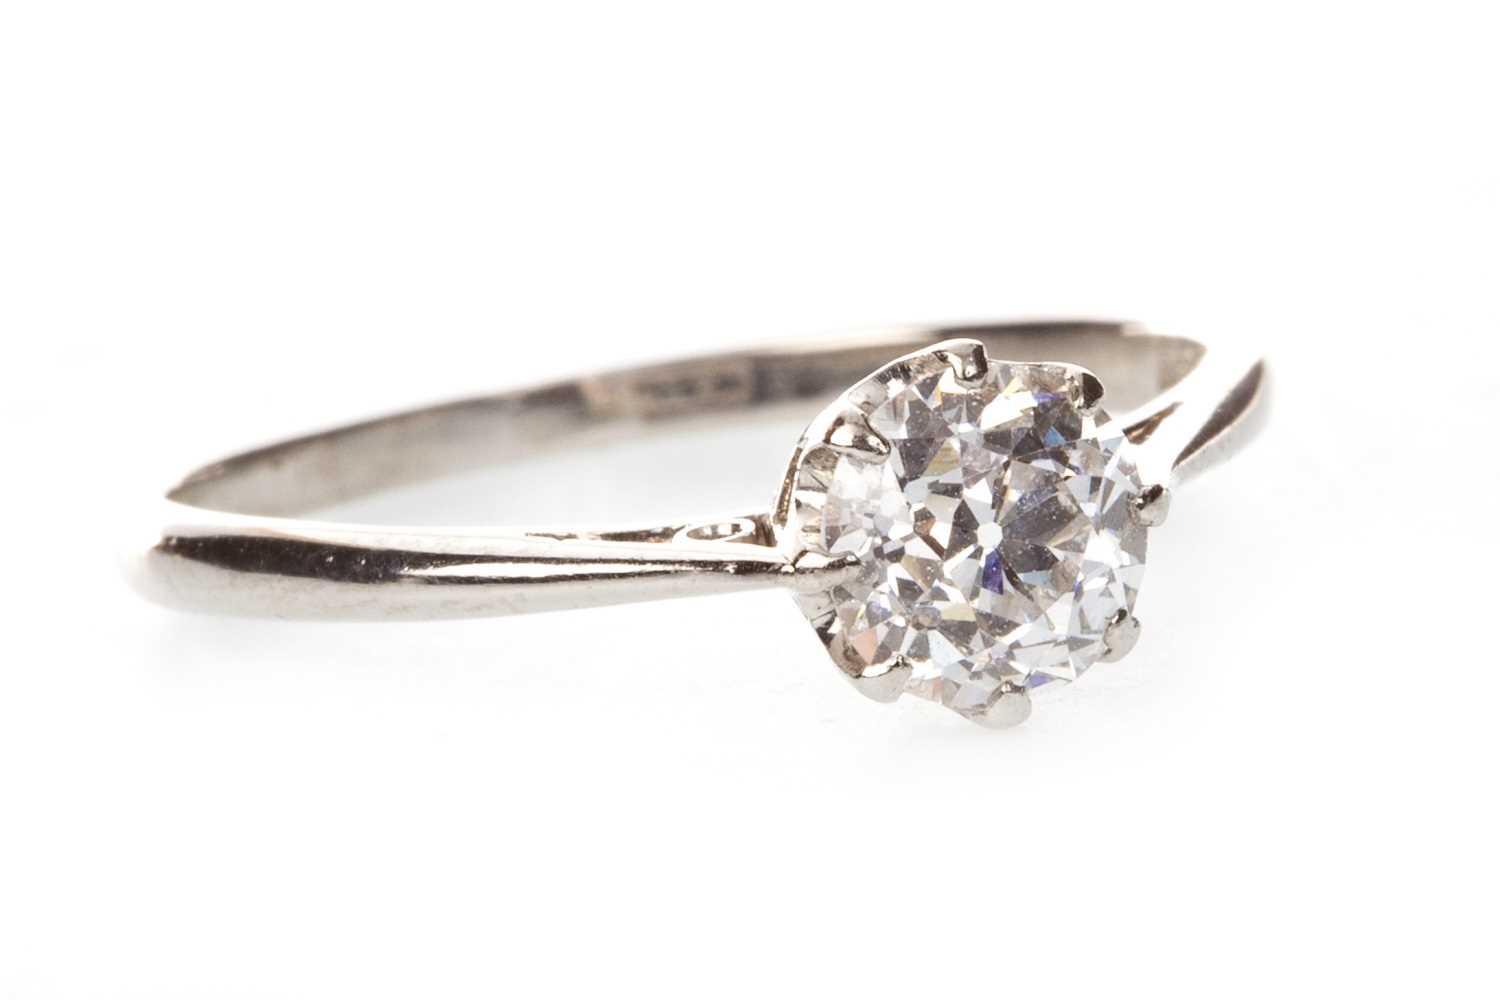 Lot 70 - A DIAMOND SOLITAIRE RING